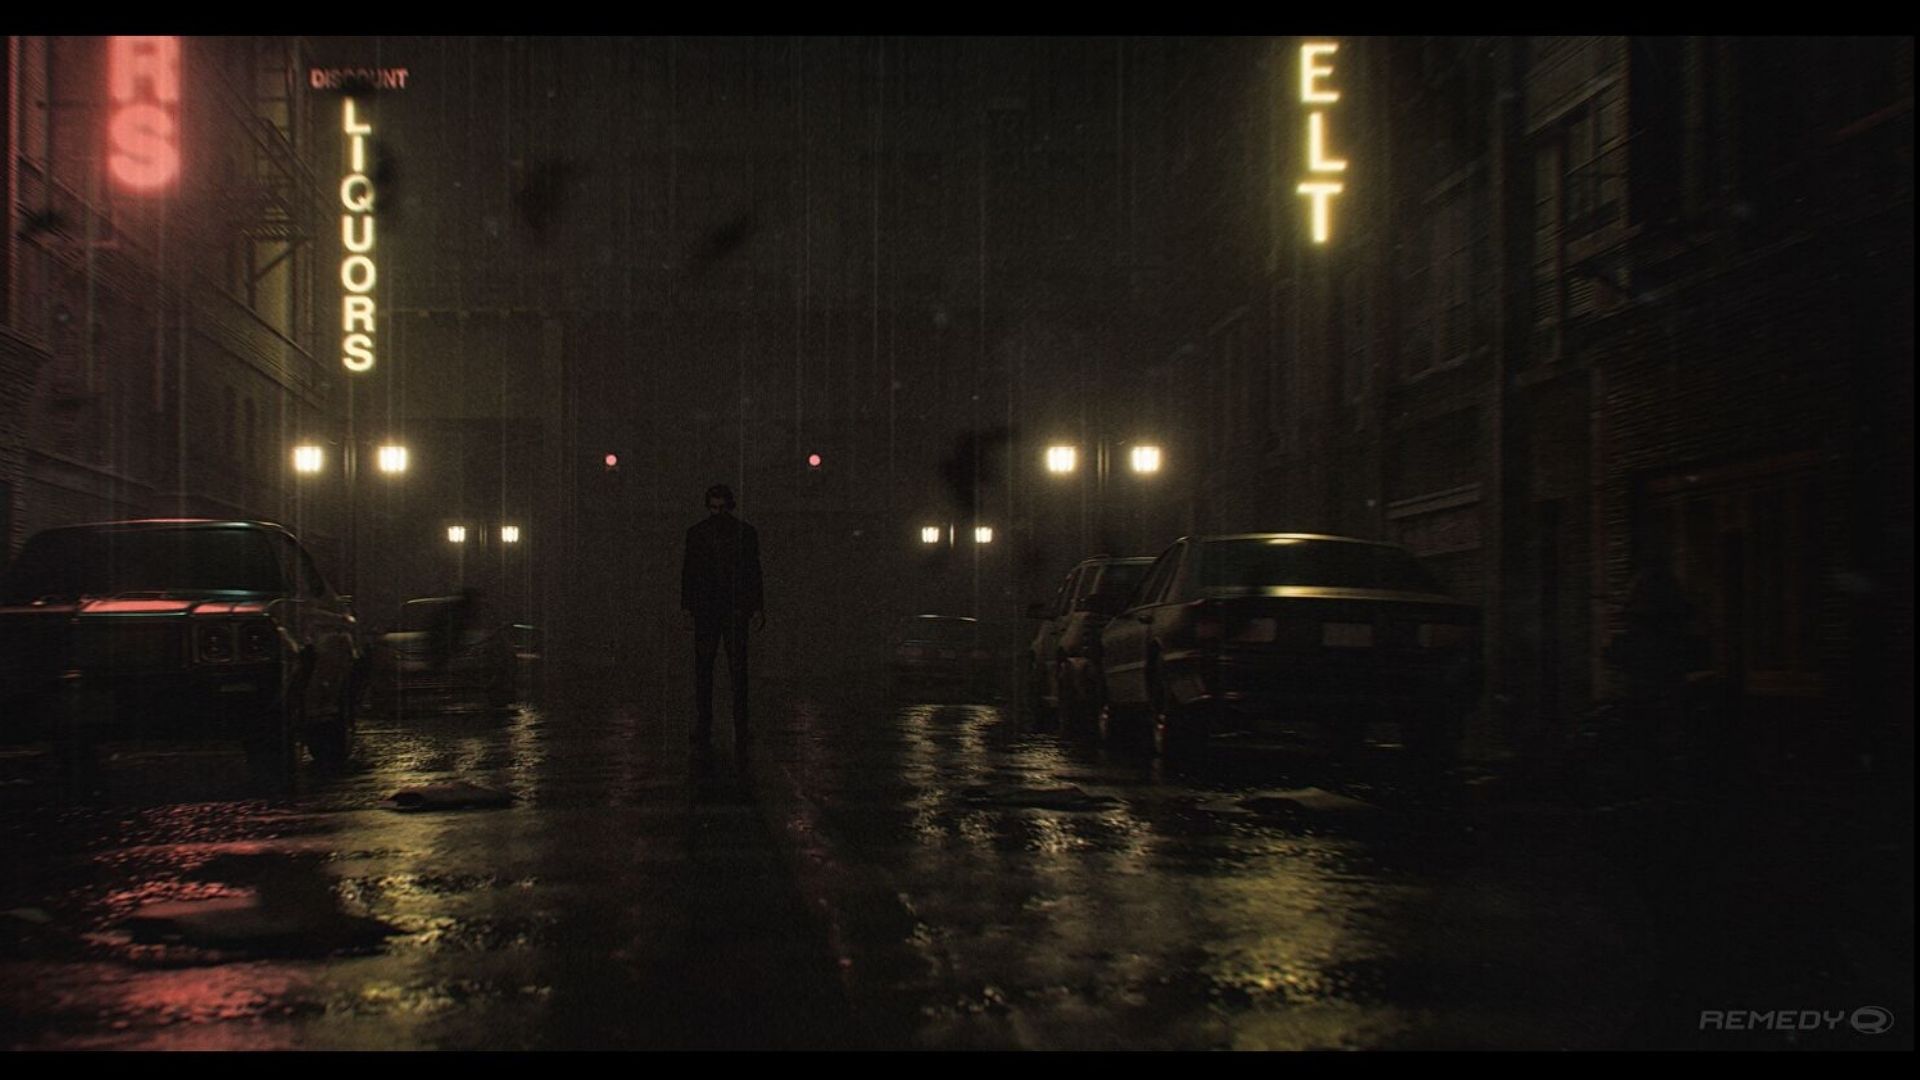 A moody cityscape. Water pools on the floor as neon signs bounce light around the dark streets. Alan Wake stands at the centre of the image.